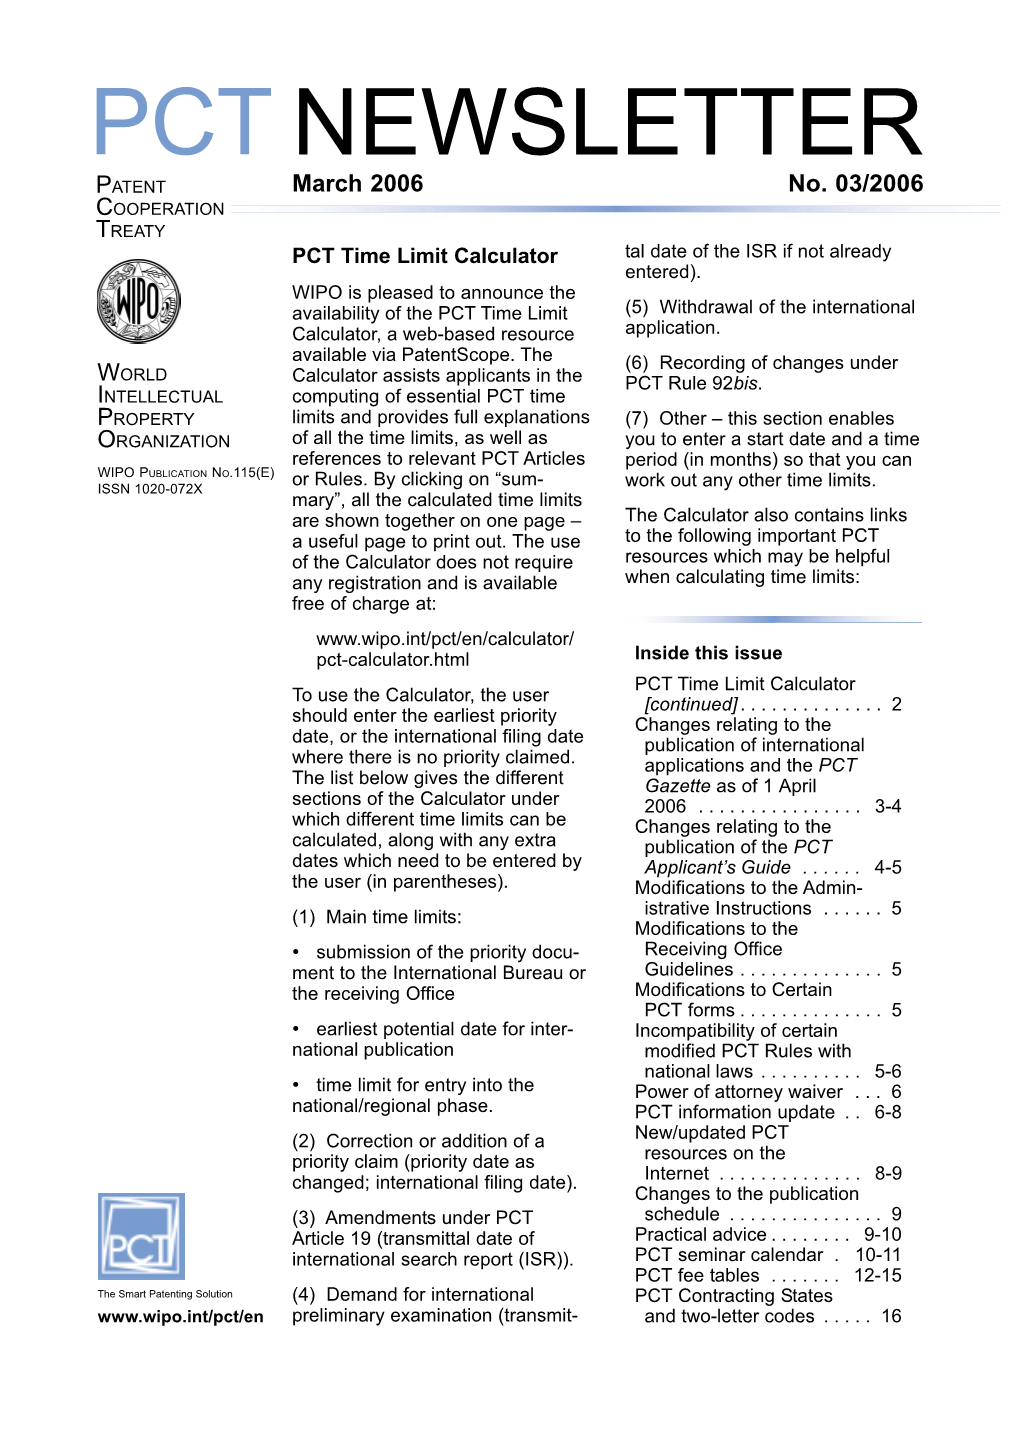 PCT Newsletter No. 03/2006